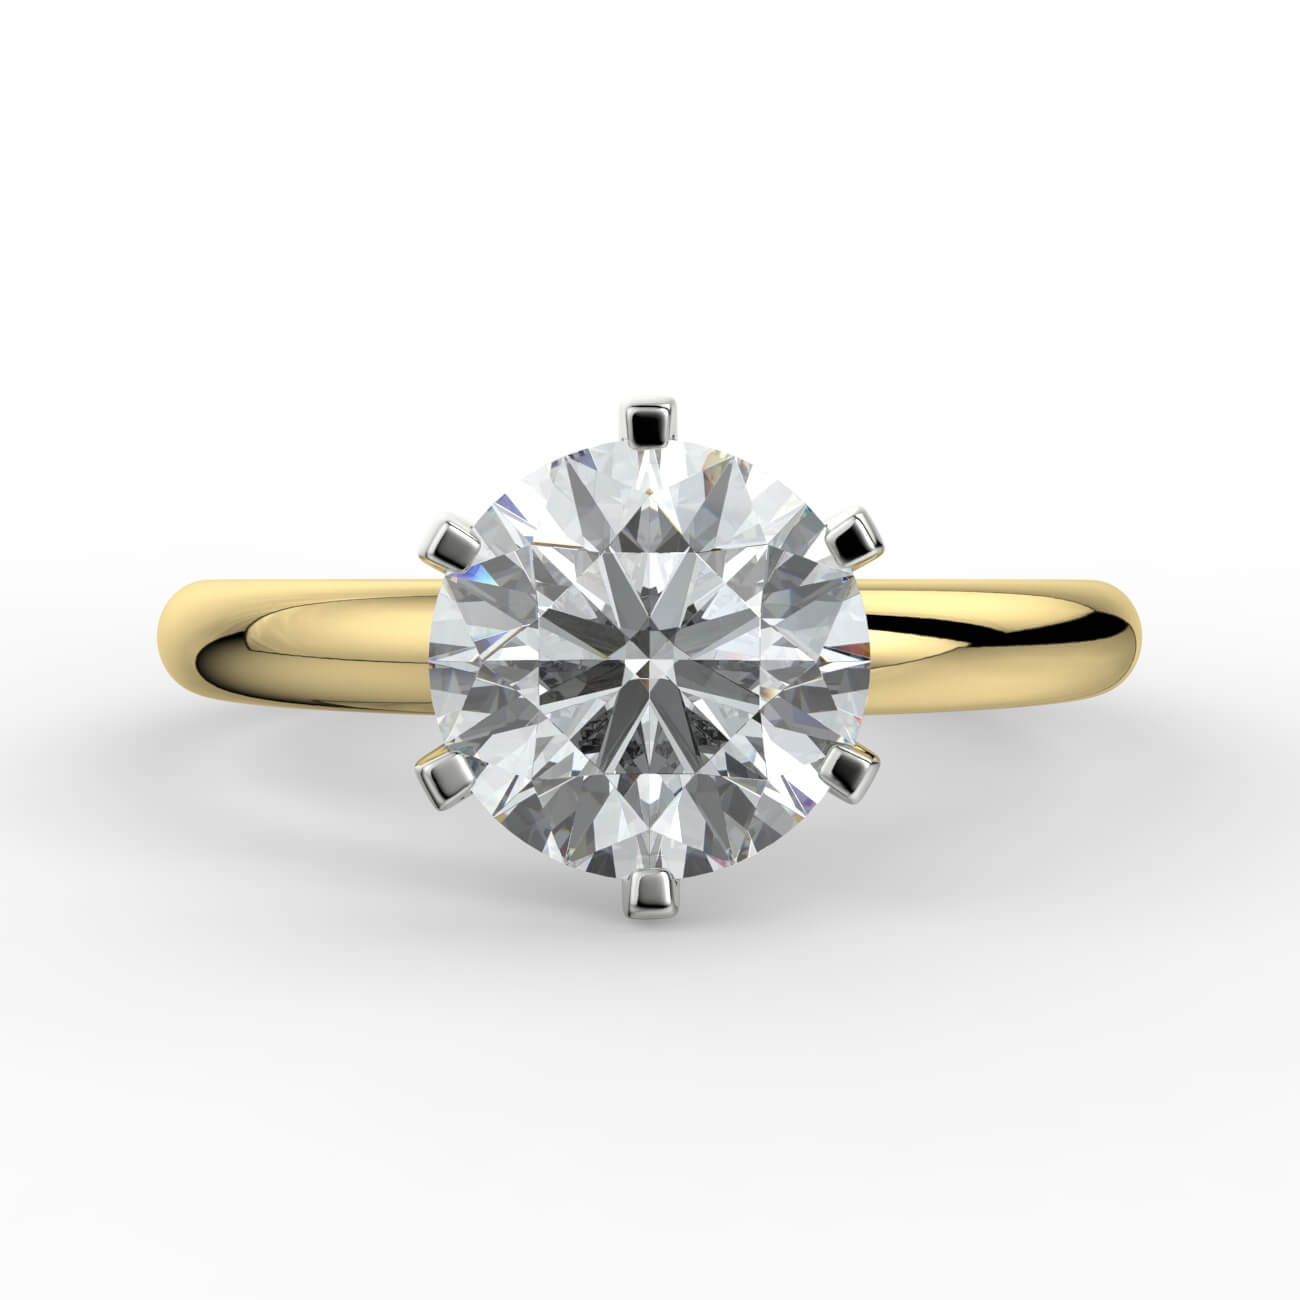 Comfort fit 6 claw solitaire diamond ring in yellow and white gold – Australian Diamond Network